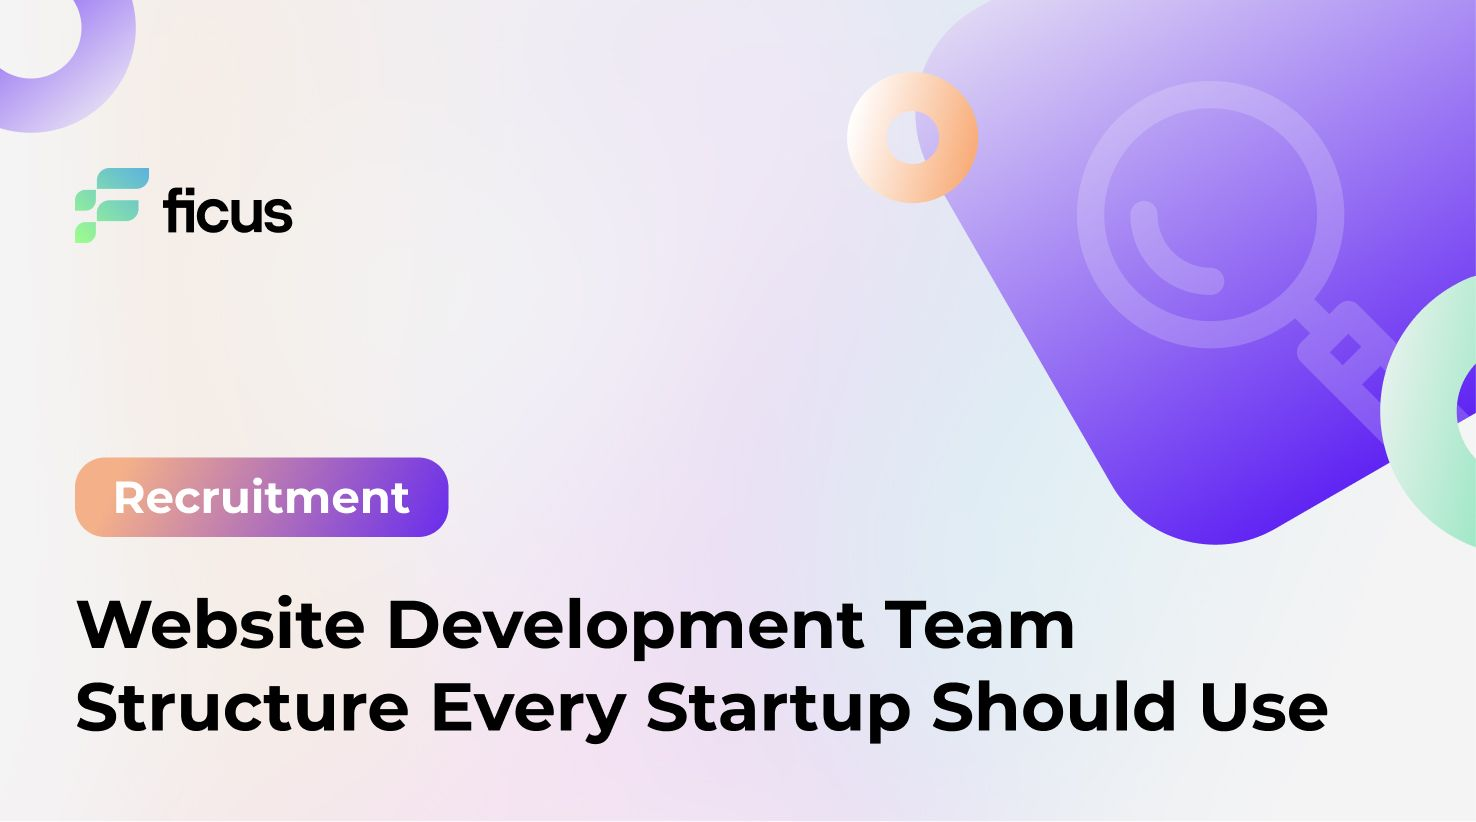 Website Development Team Structure Every Startup Should Use